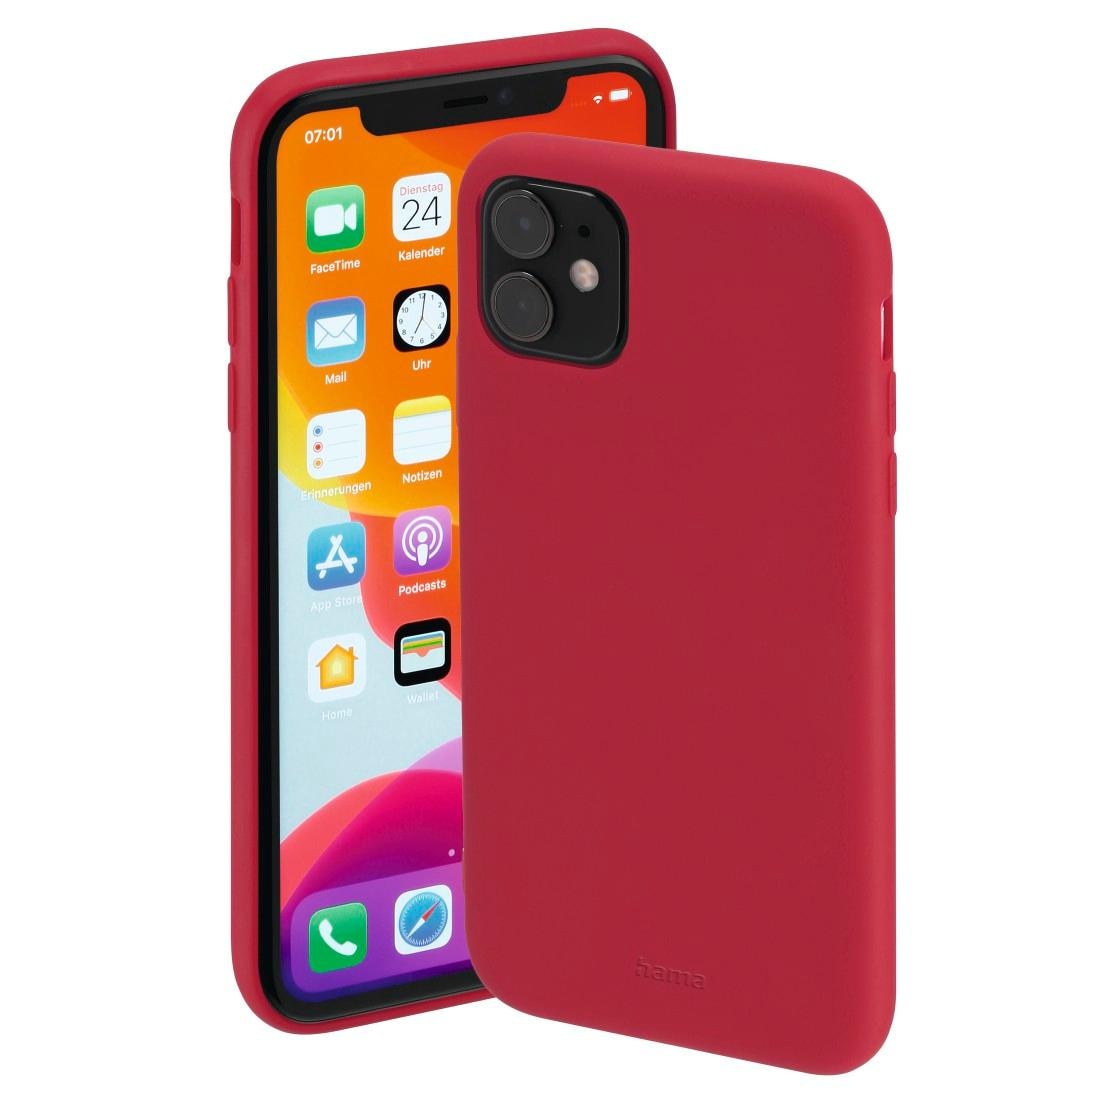 Smartphone-Hülle »Cover, Hülle für Apple iPhone 11 Smartphone-Cover "Finest Feel"«,...